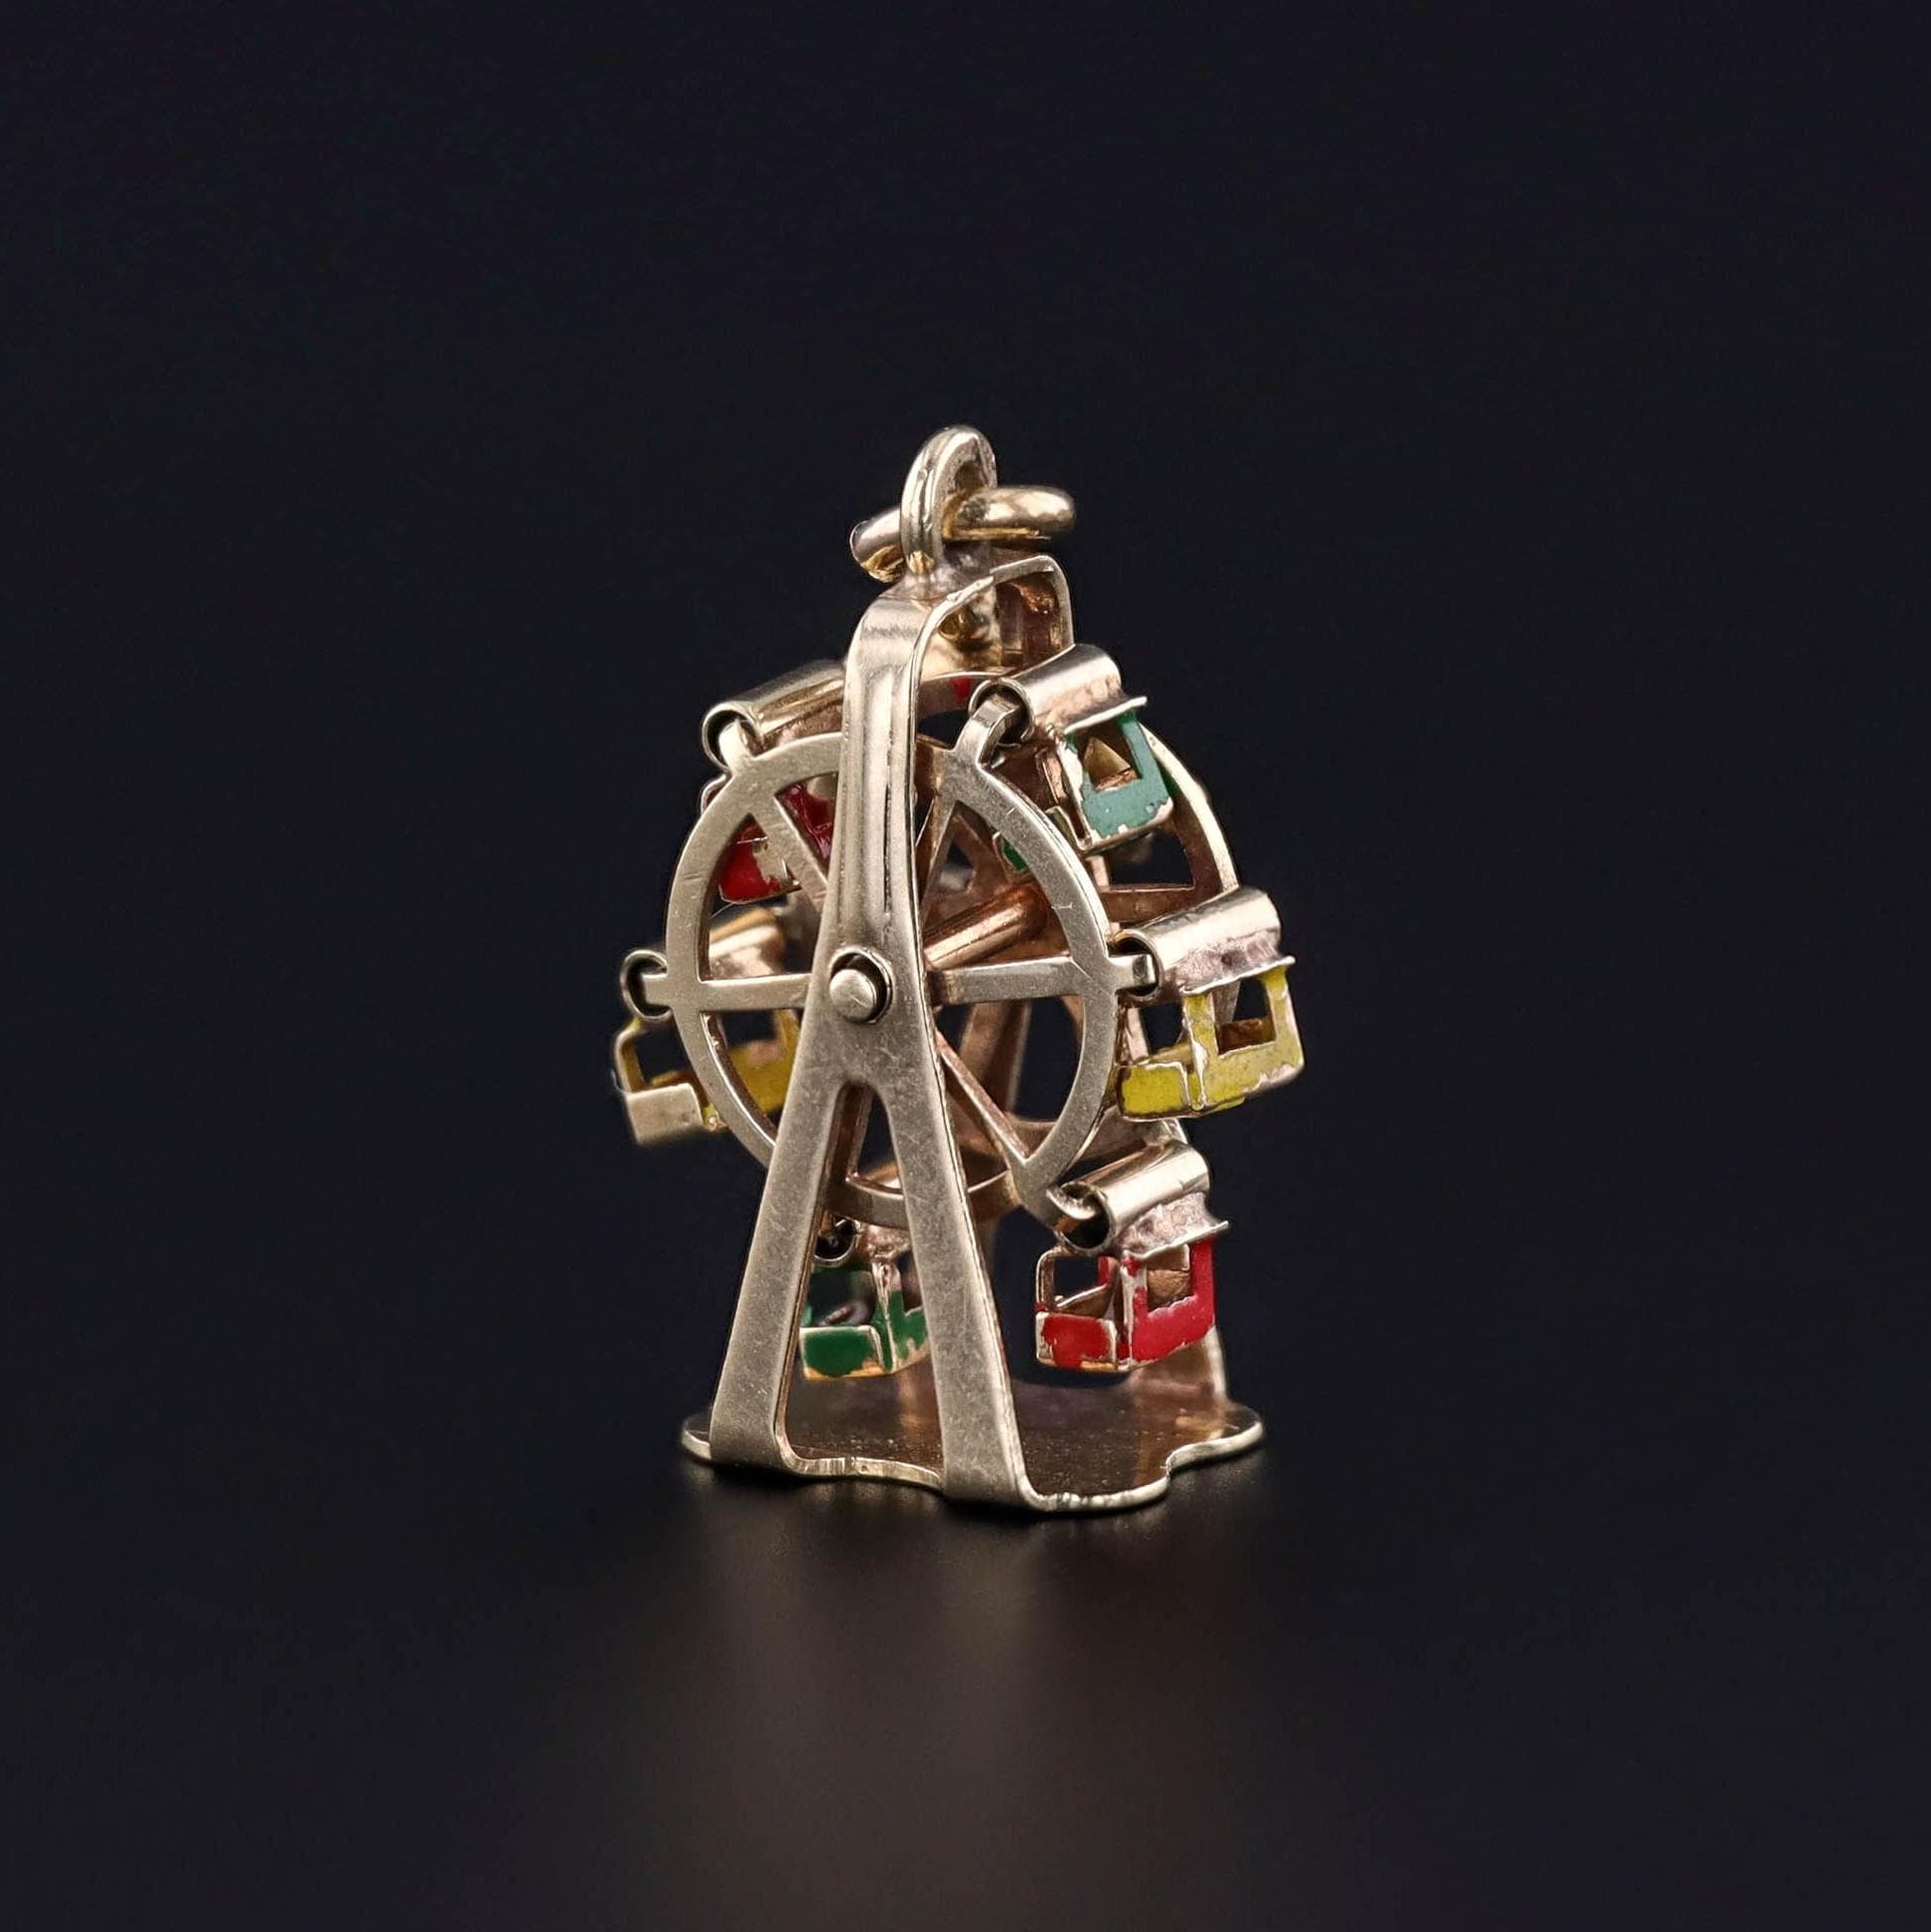 A vintage ferris wheel charm of 14k gold and enamel. The charm dates to the 1950s.